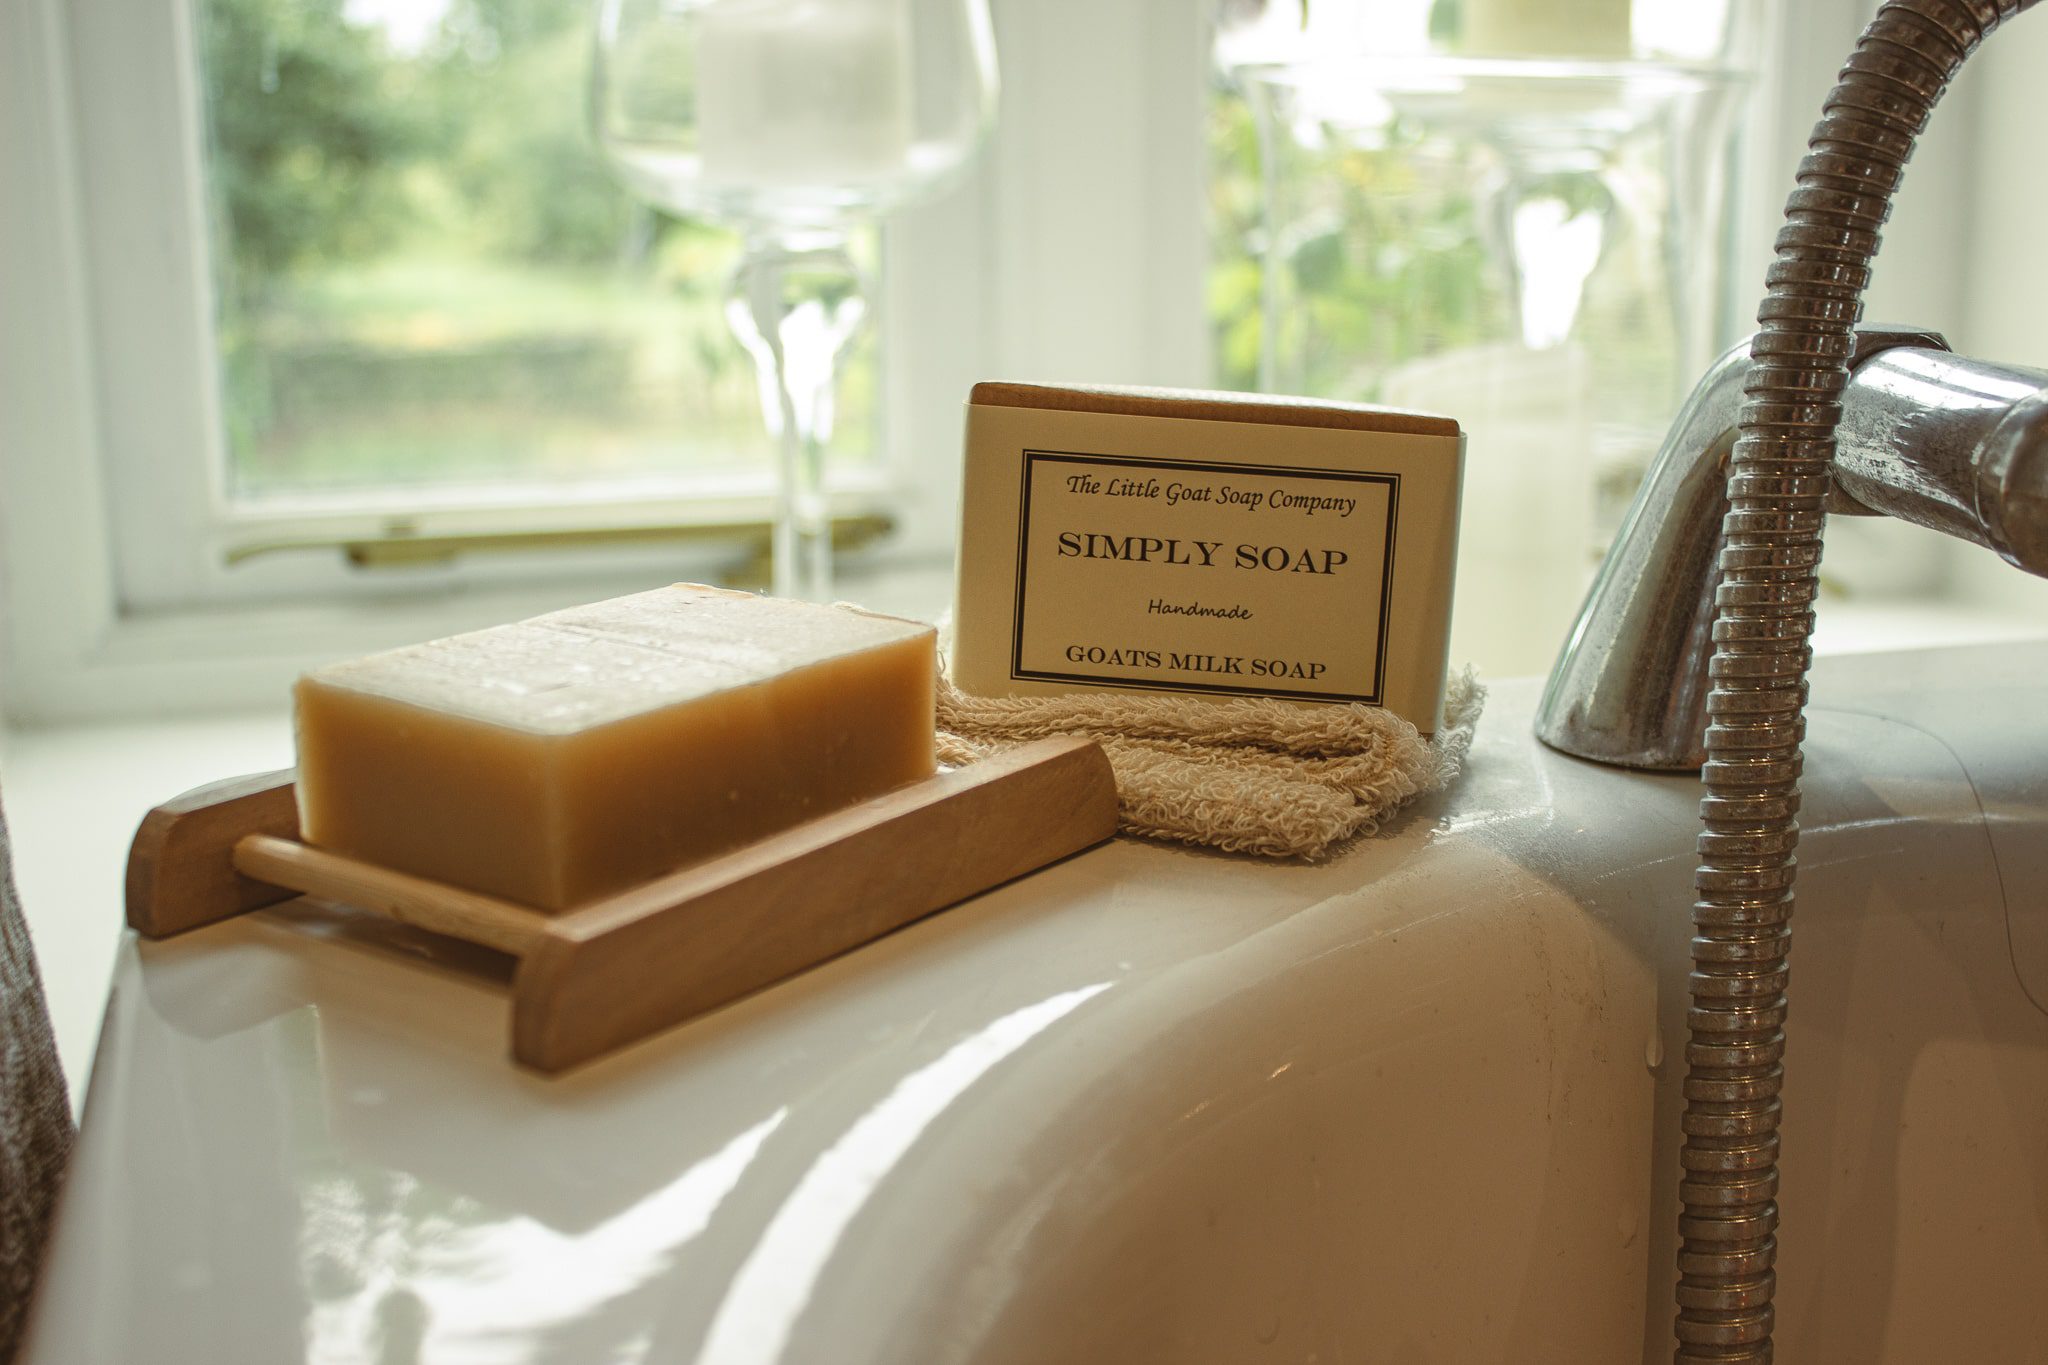 goat milk soap, on a soap tray by the bath. There is also a soap bar still in its packaging resting on a soap bag.